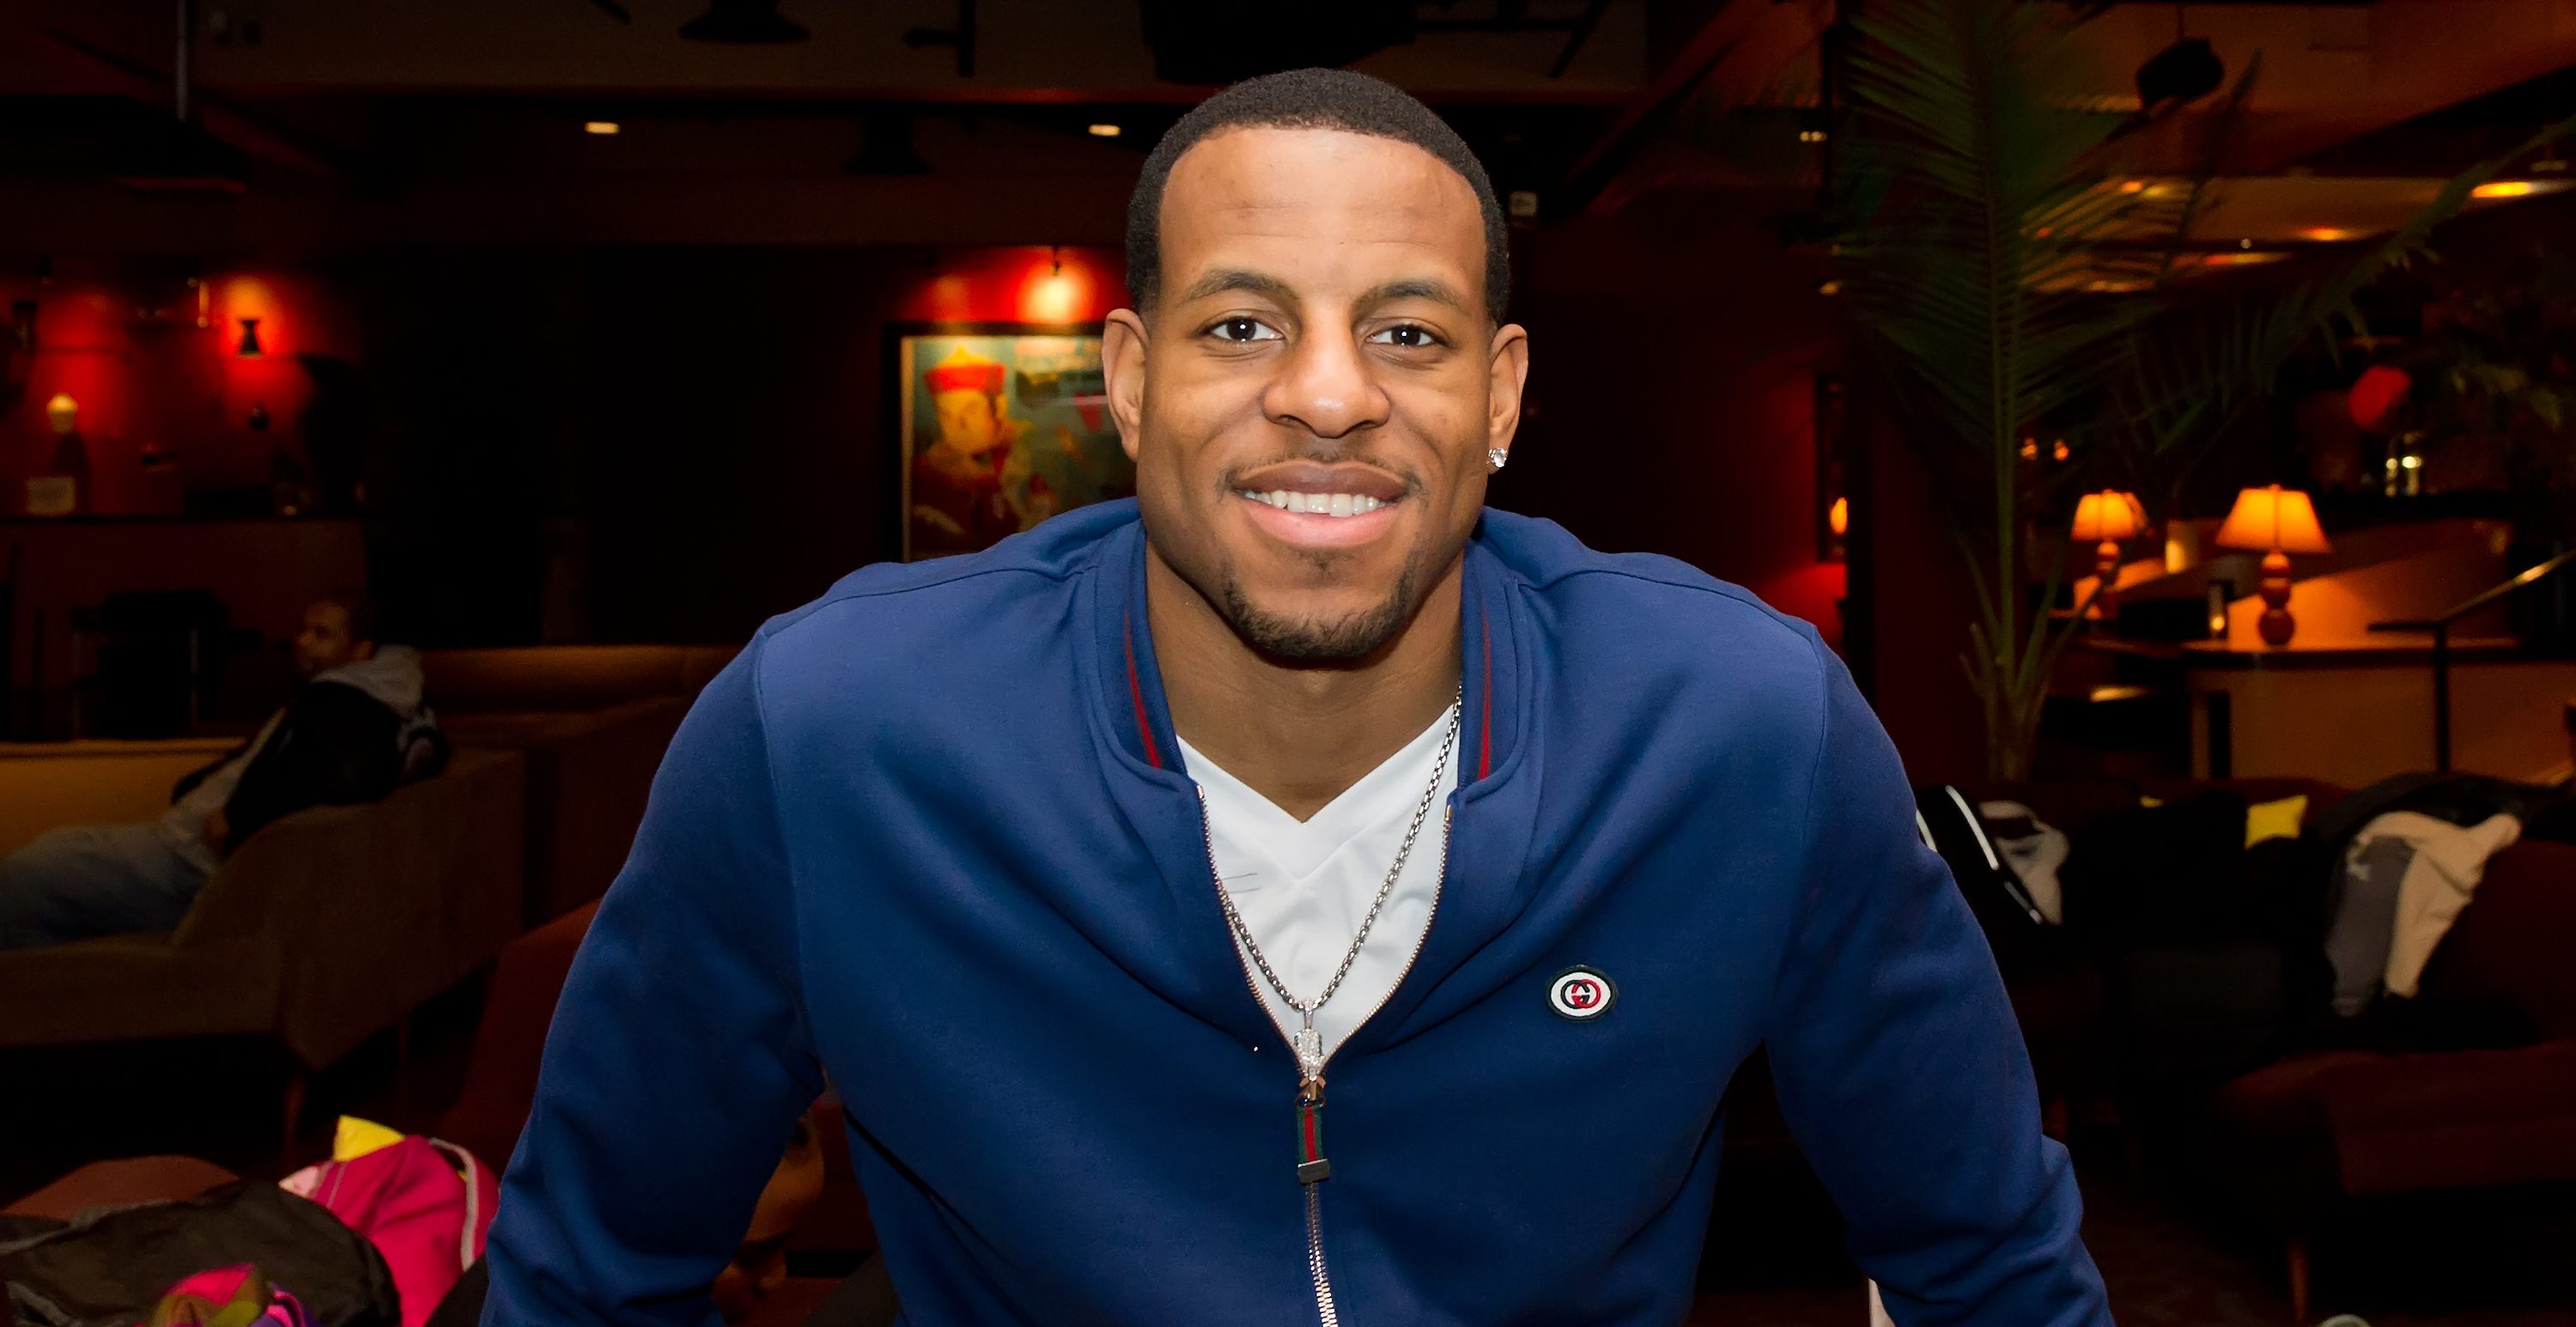 Four-time champion Andre Iguodala to retire from NBA